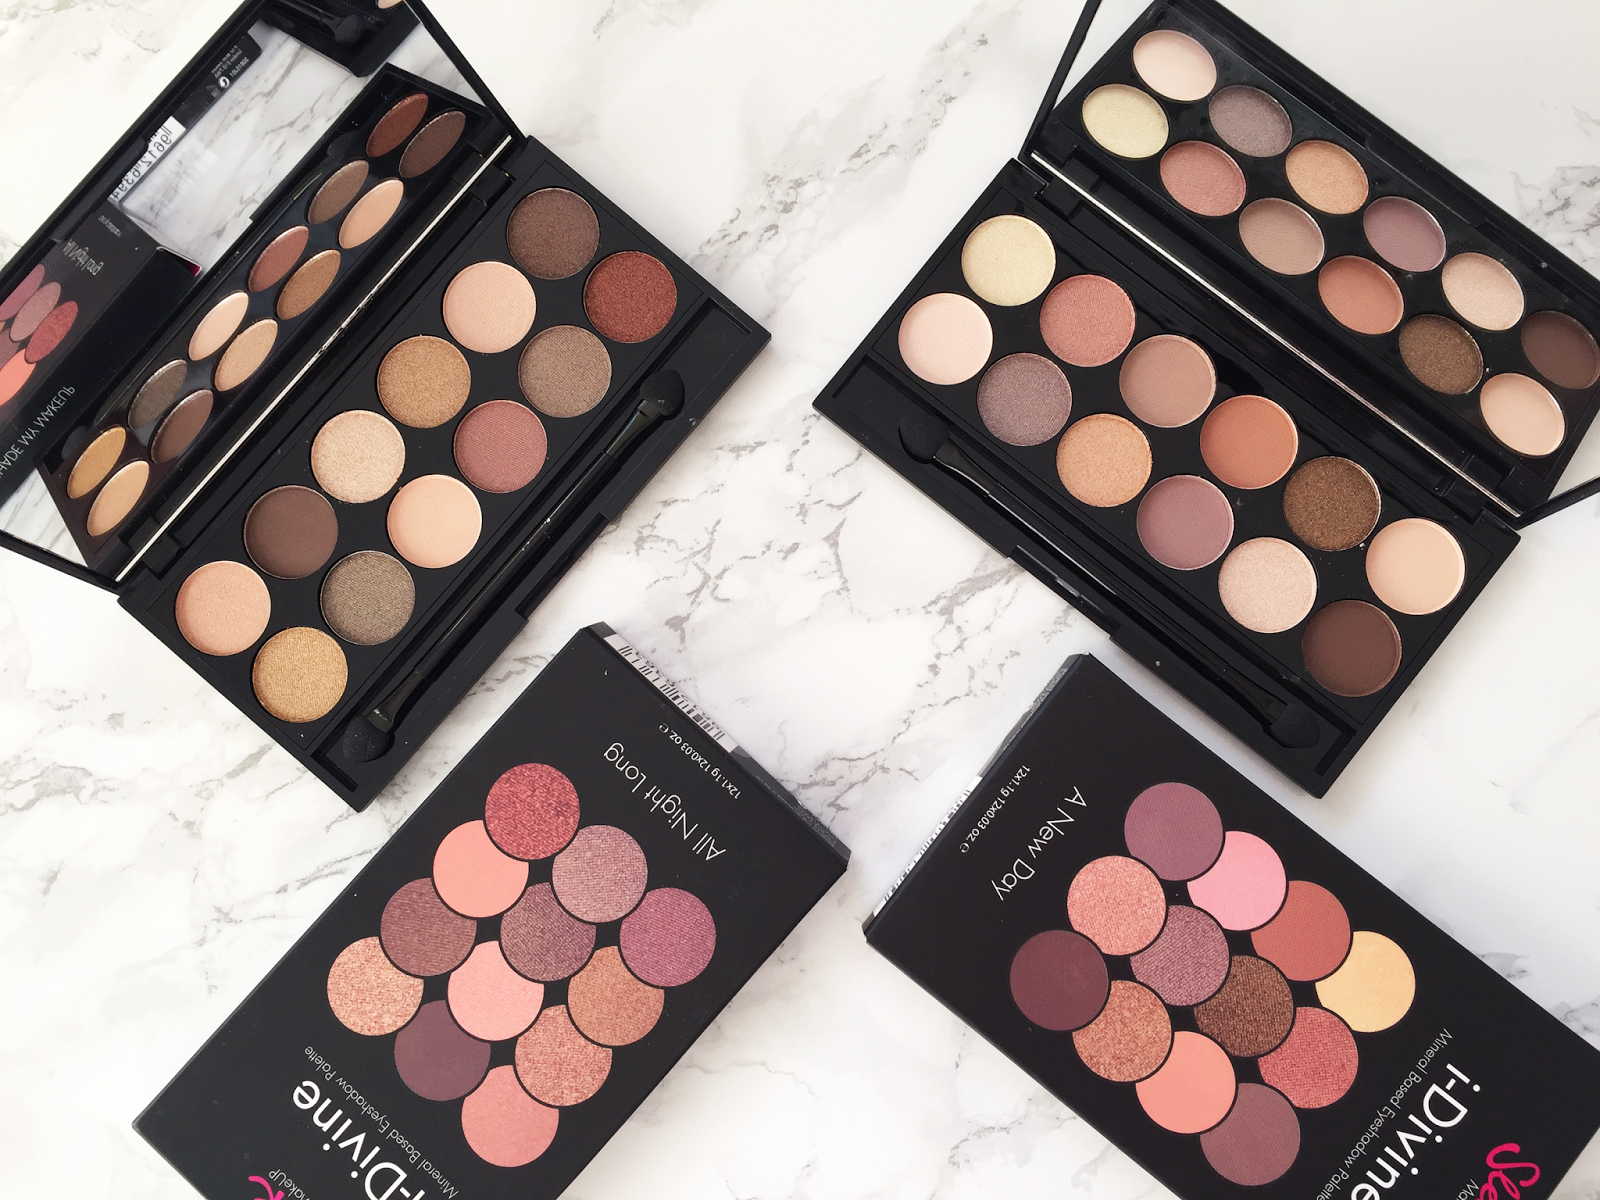 Sleek I Divine A New Day and All Night Long Palettes